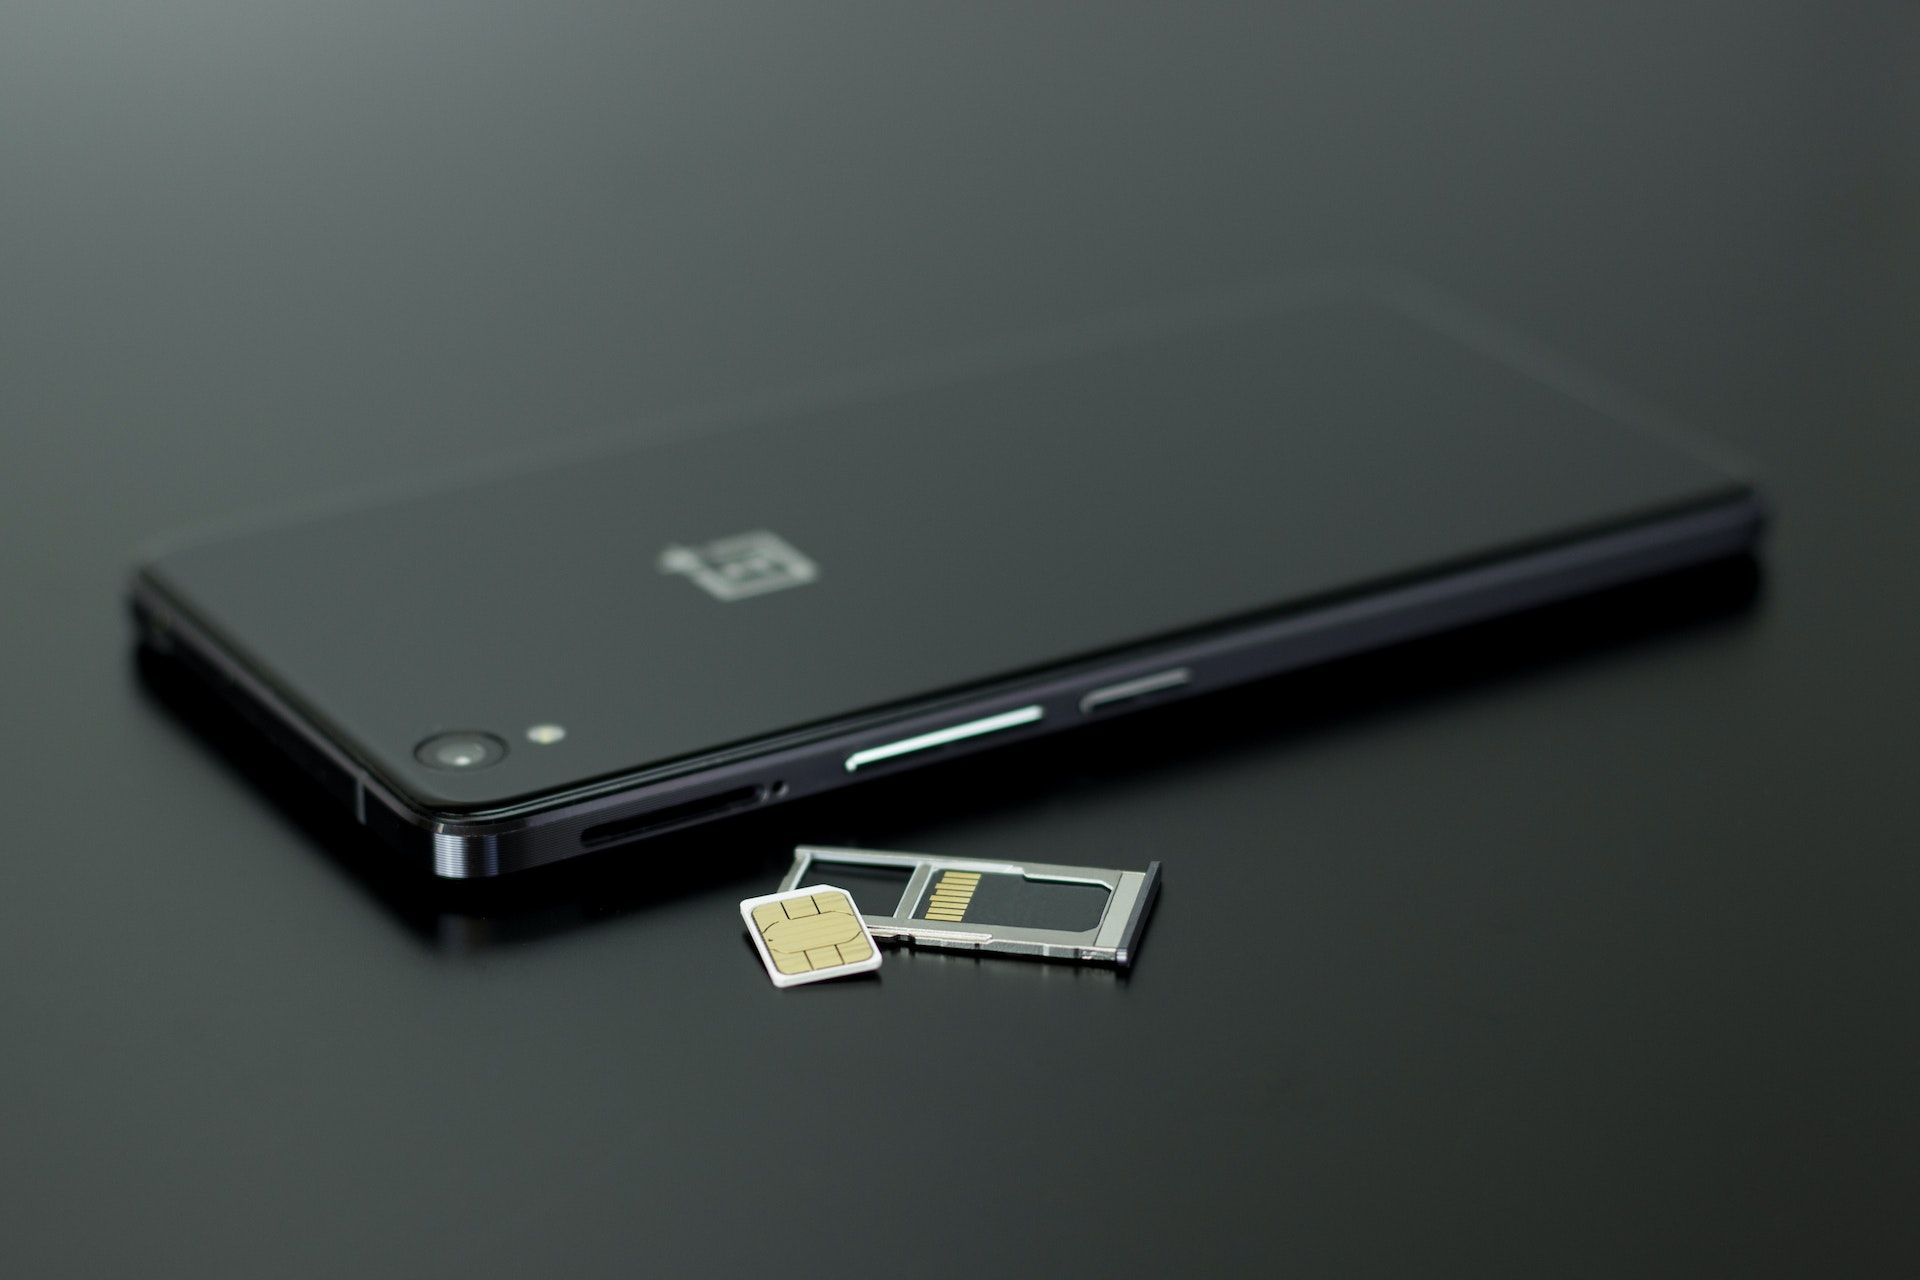 A black smart phone with a sim card slot removed and its nano sim on display.